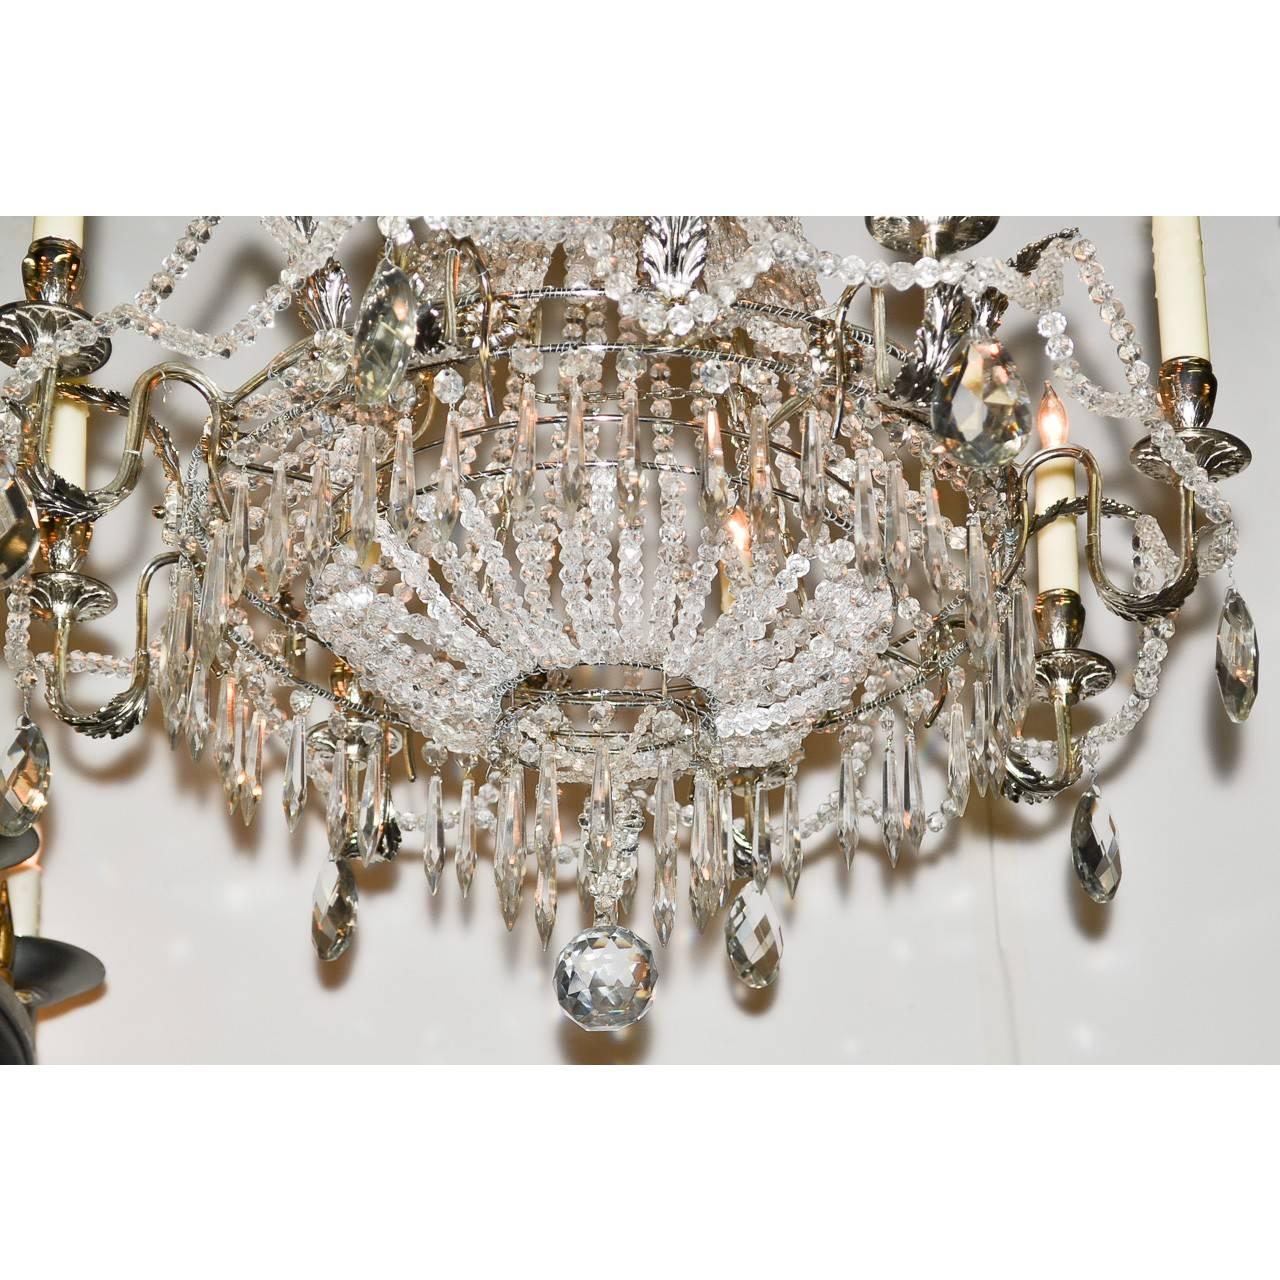 Elegant early 20th century French silver gilt, crystal and bronze chandelier. The canopy with leaf spray adornments draped with beaded crystal and large tear-drop crystal prisms. The main body with long strands of beaded crystal that form a small